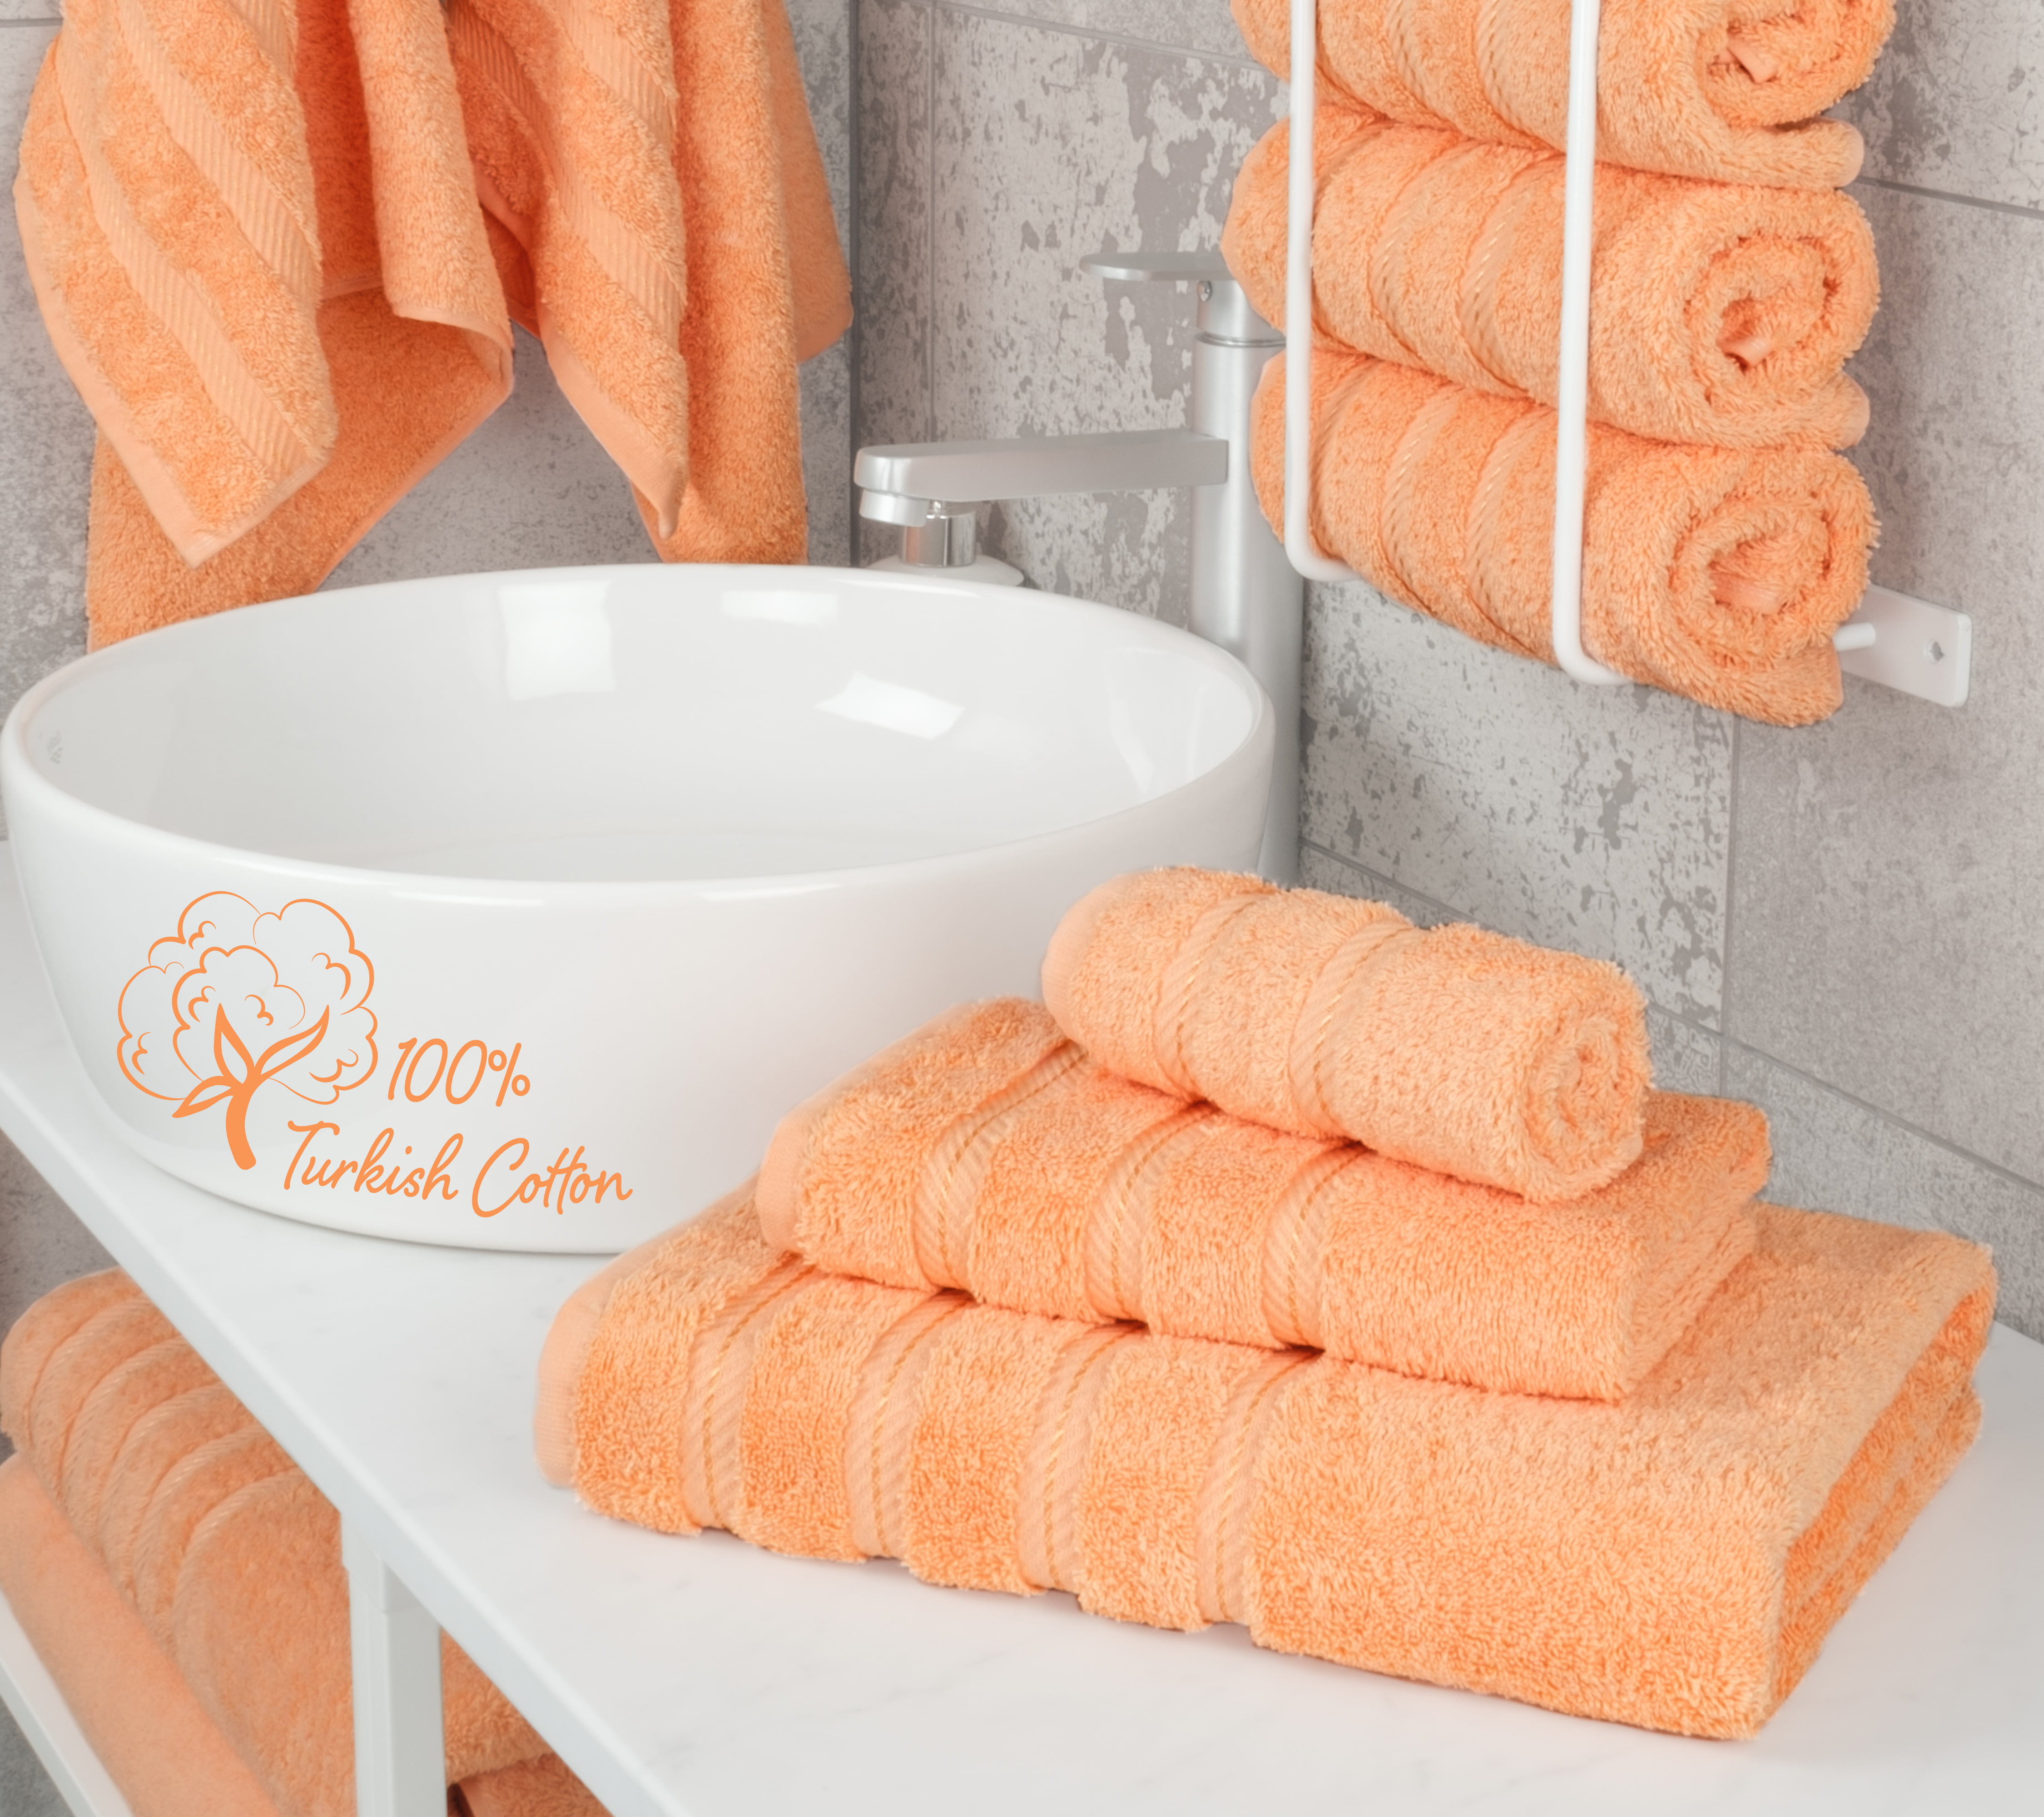 Buy Luxury Bath Towels Set: Style & Comfort Together – Bumble Towels